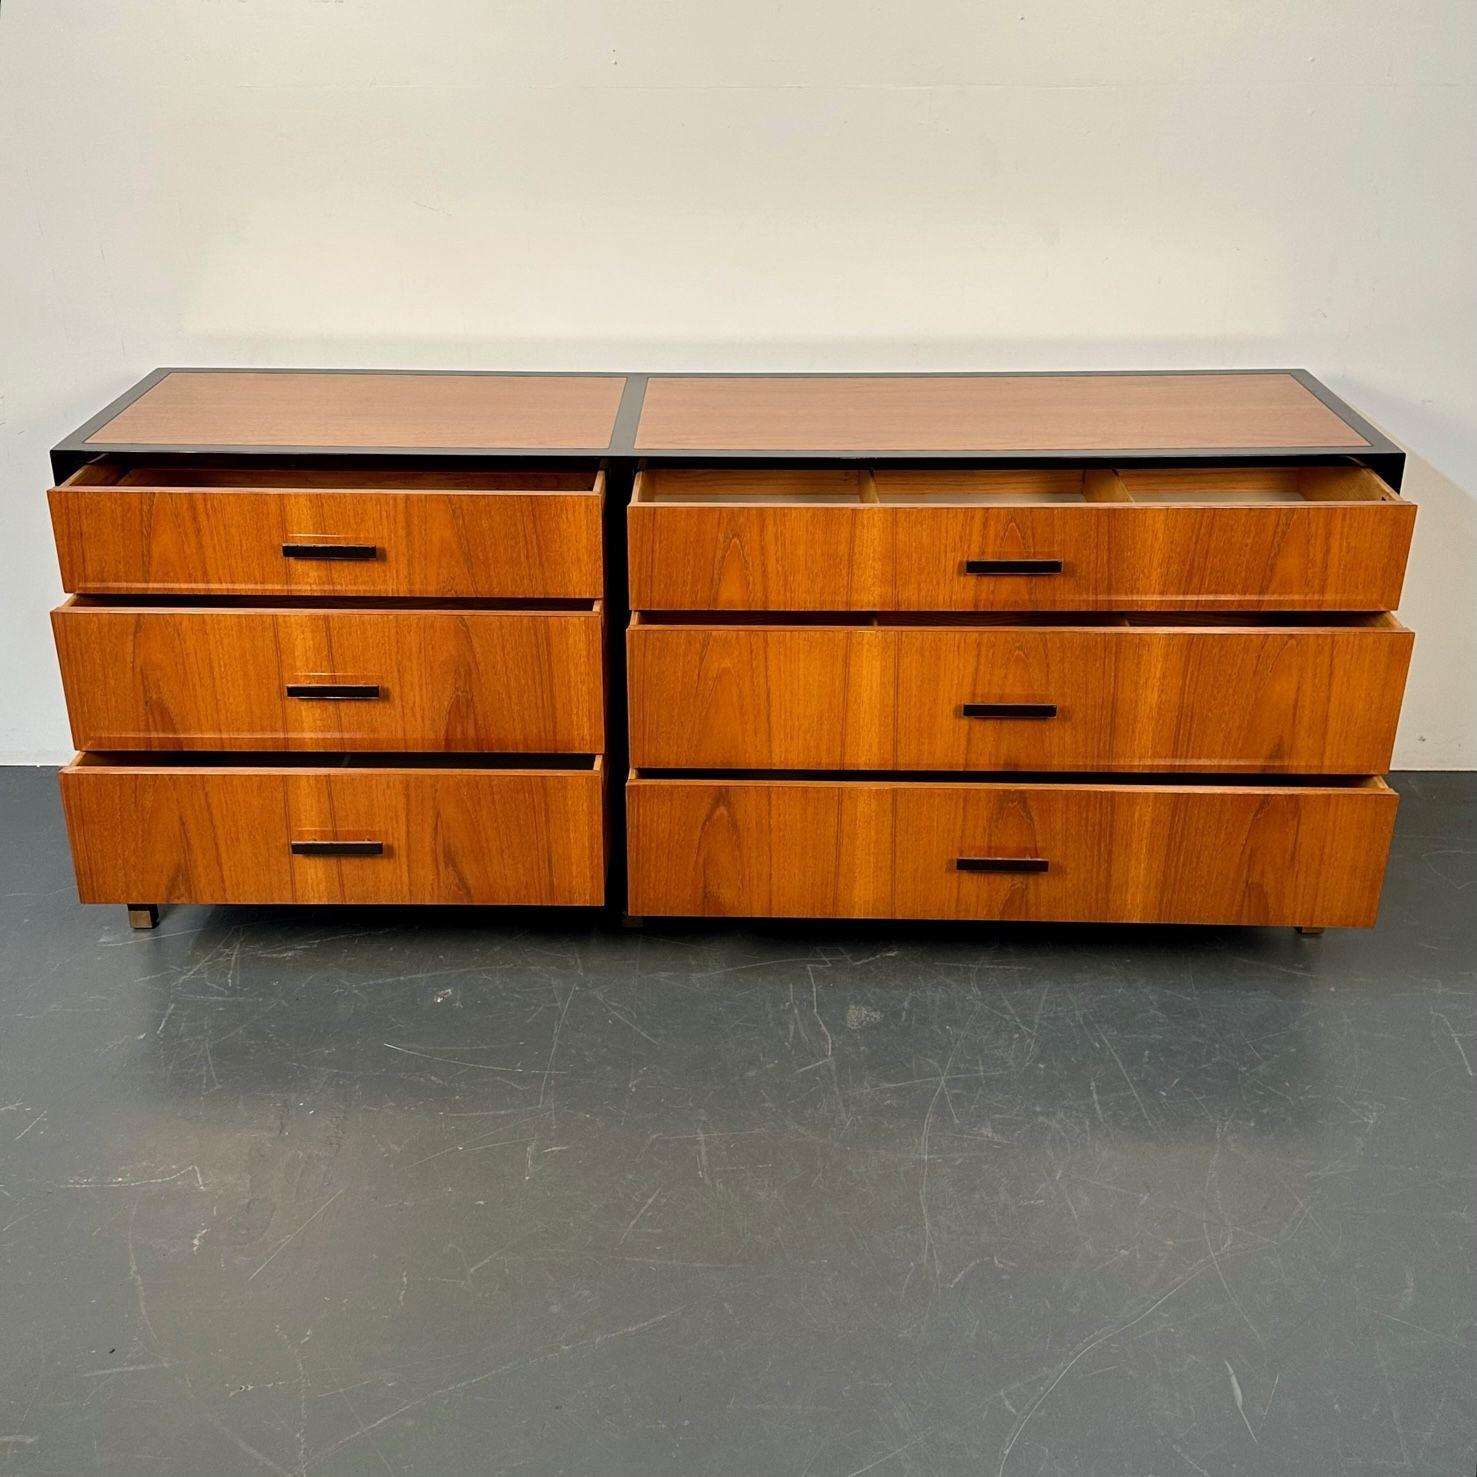 American Mid-Century Modern Rosewood Dresser / Sideboard by Harvey Probber 1960s For Sale 3